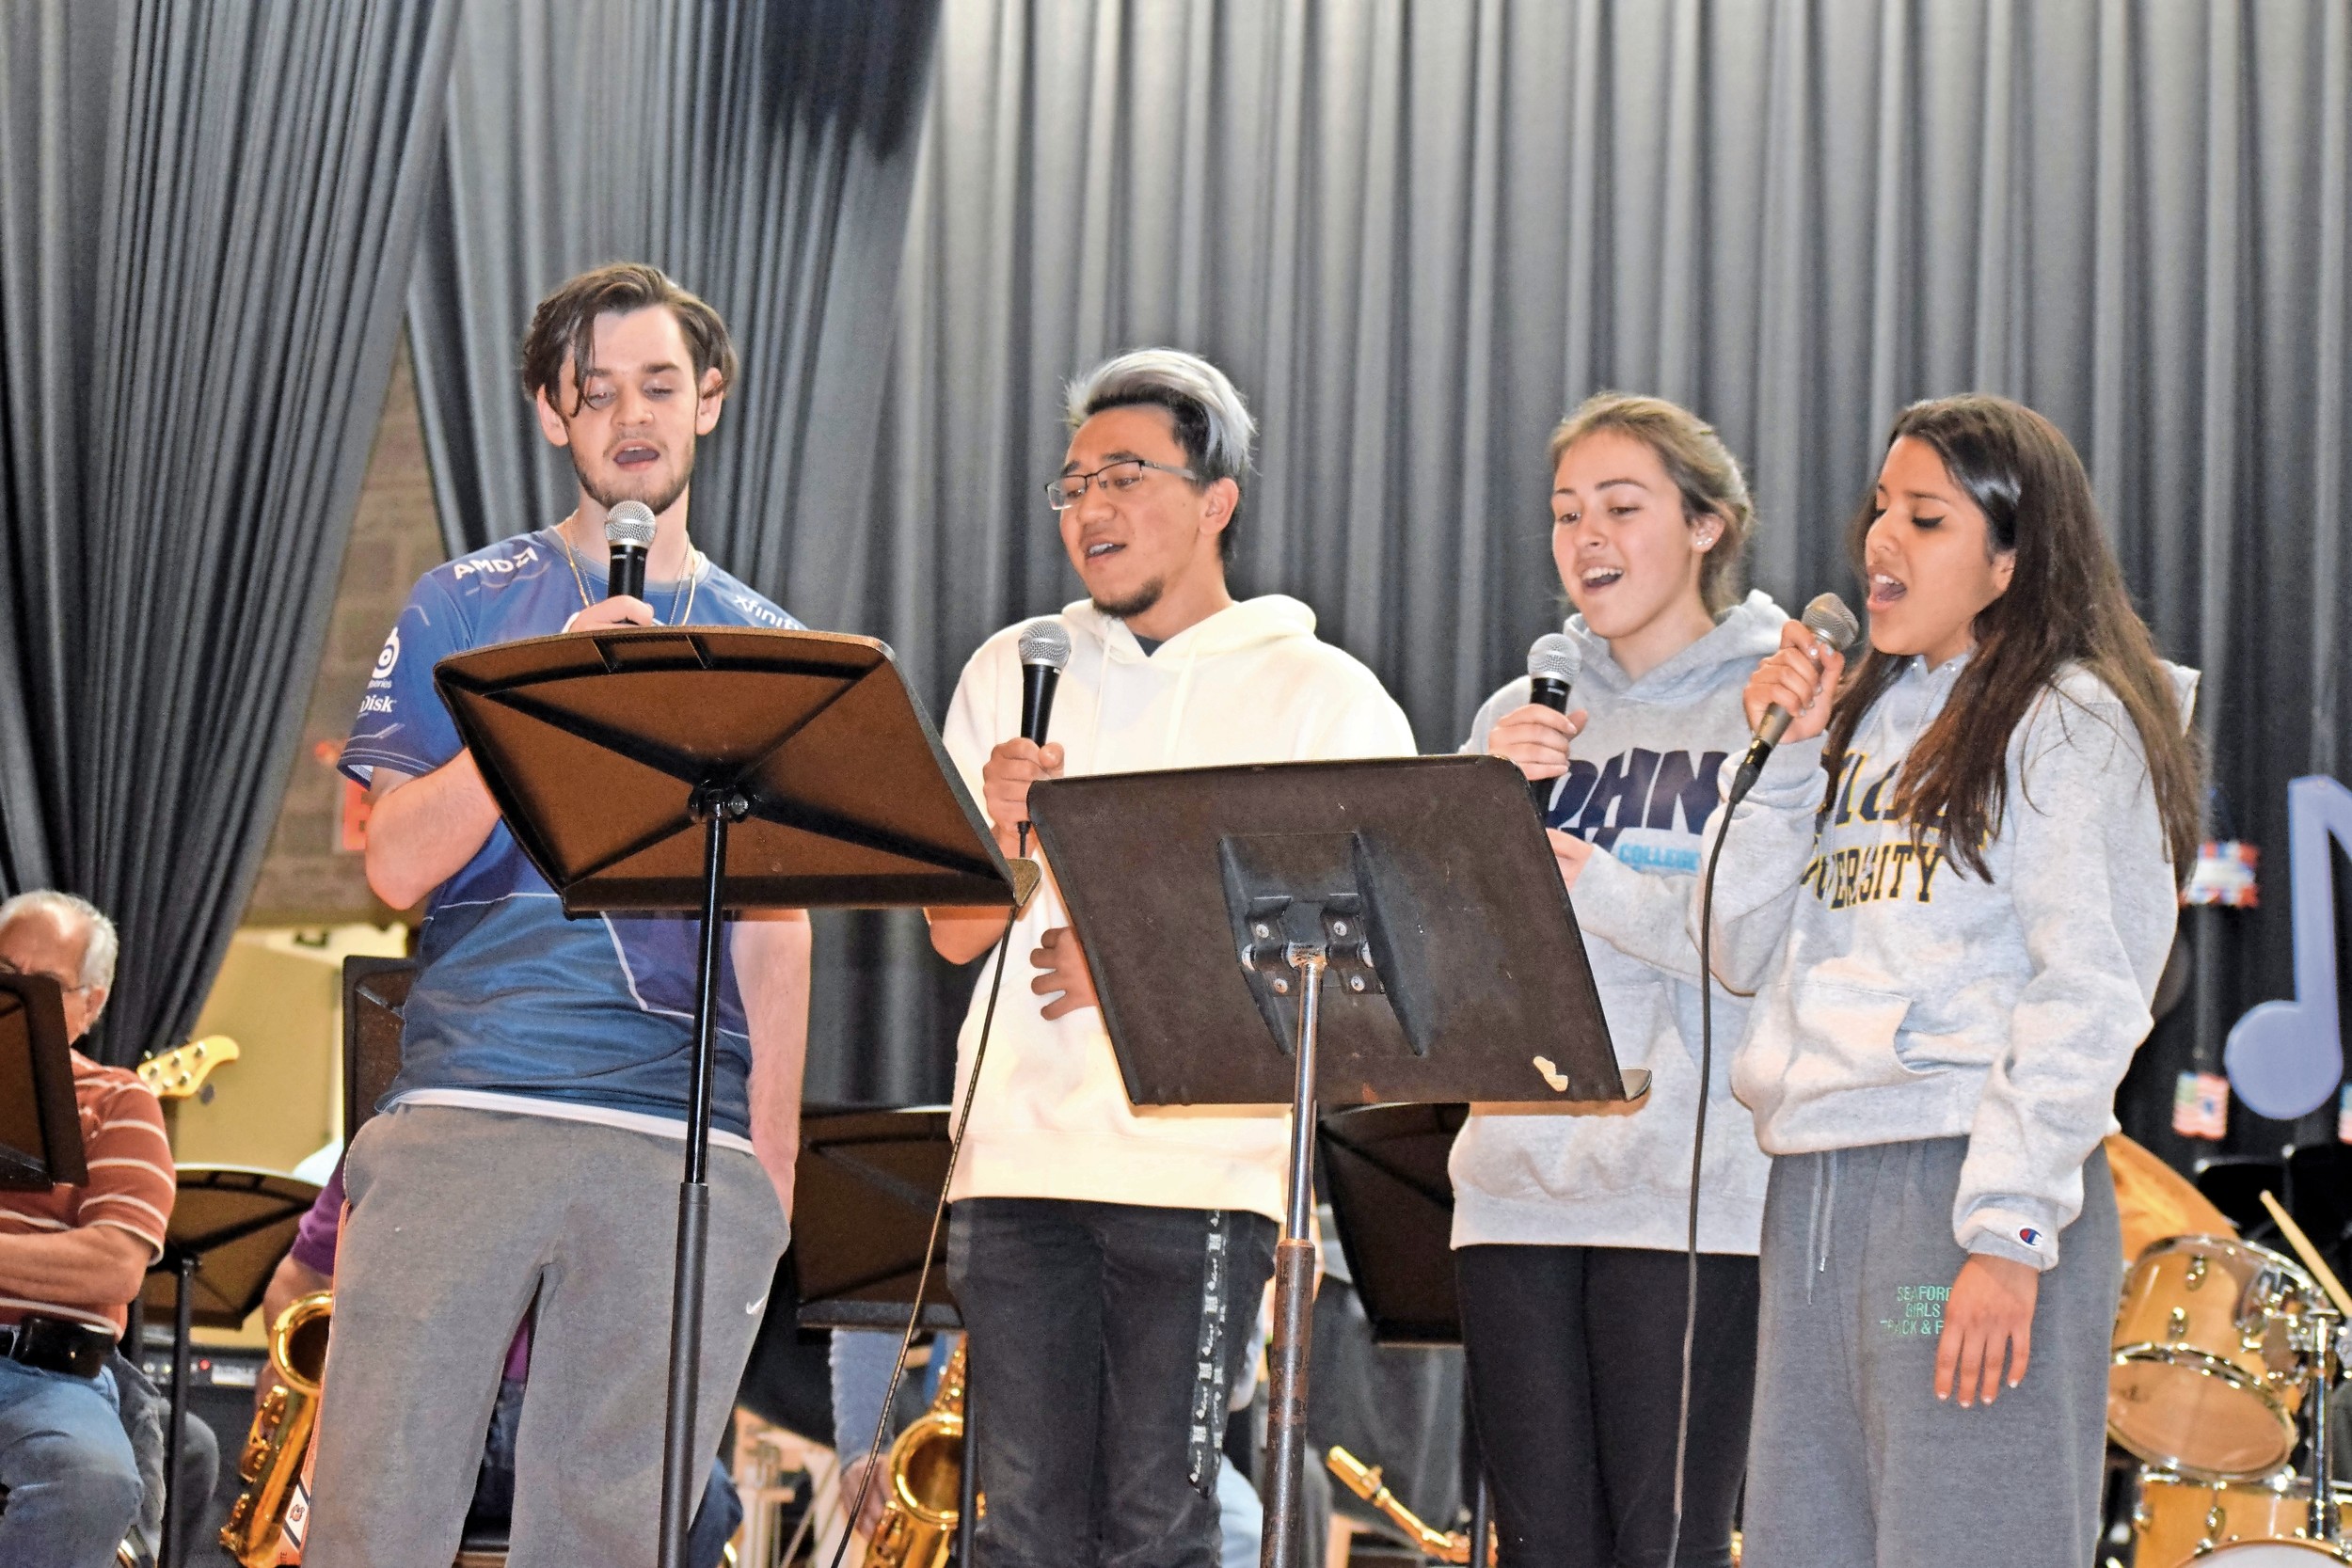 Seaford High School seniors sang in the chorus at the band’s annual spring concert on May 13. Scott Wilson, left, Christopher Ho, Kayla Marino and Elissa Castro performed.